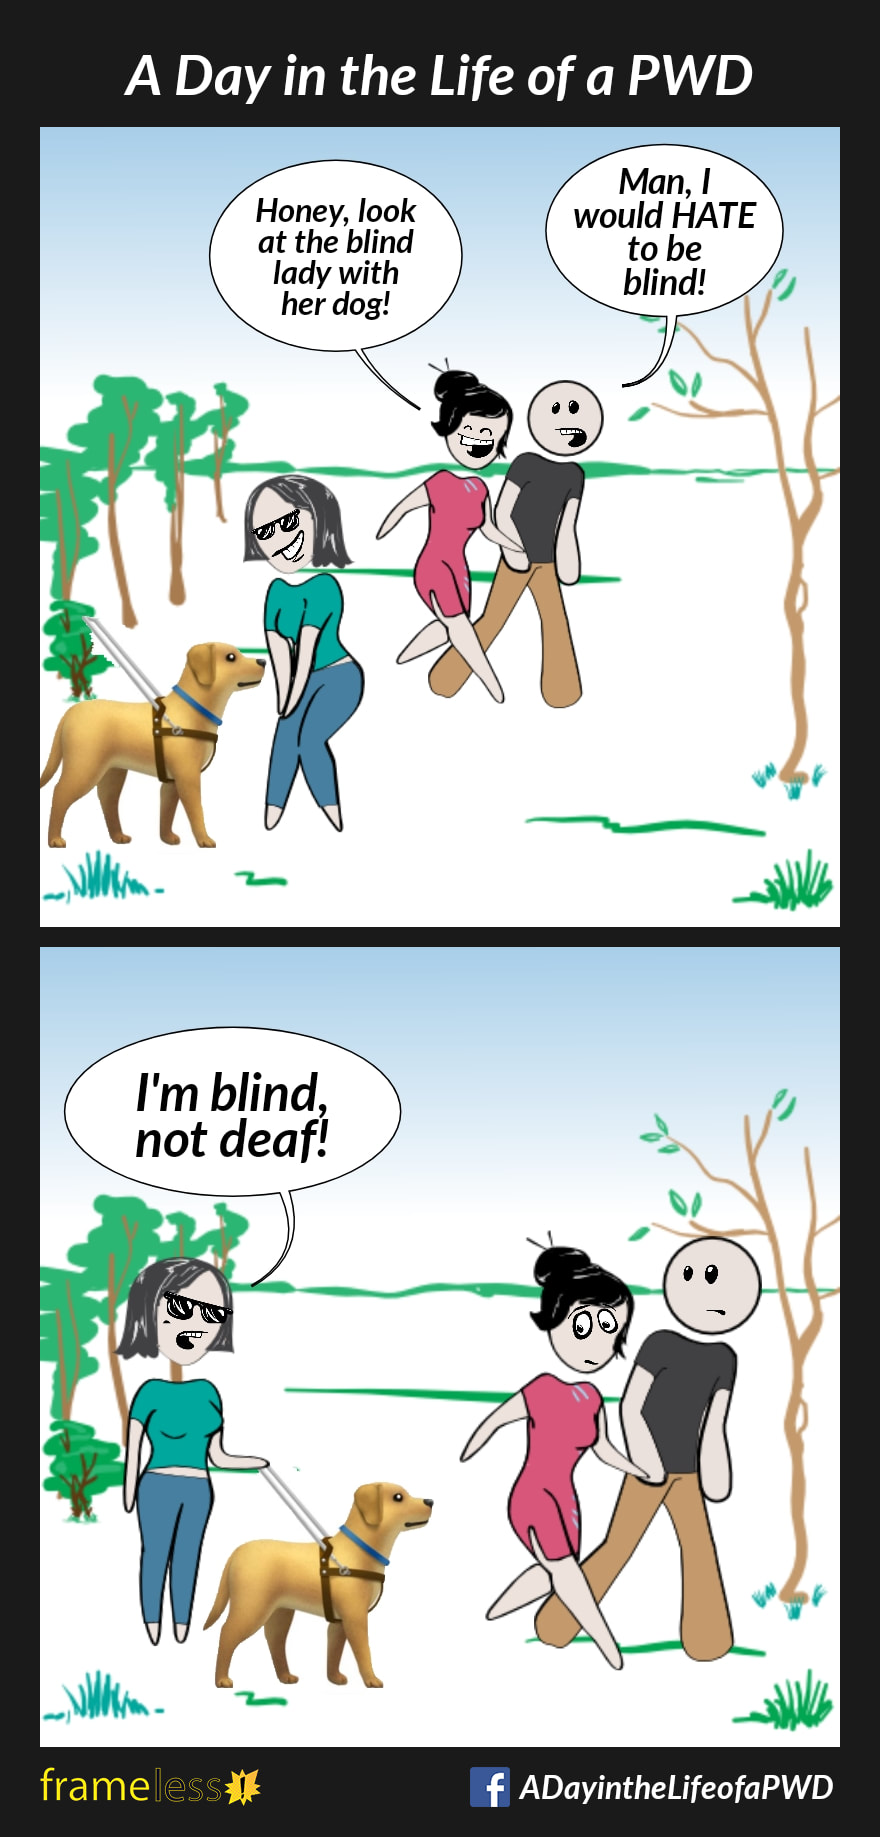 COMIC STRIP 
A Day in the Life of a PWD (Person With a Disability) 

Frame 1:
A woman wearing dark glasses is in a park with her guide dog. A couple passes by them.
WIFE: Honey, look at the blind lady with her dog!
HUSBAND: Man, I would HATE to be blind!

Frame 2:
WOMAN (to the couple): I'm blind, not deaf!